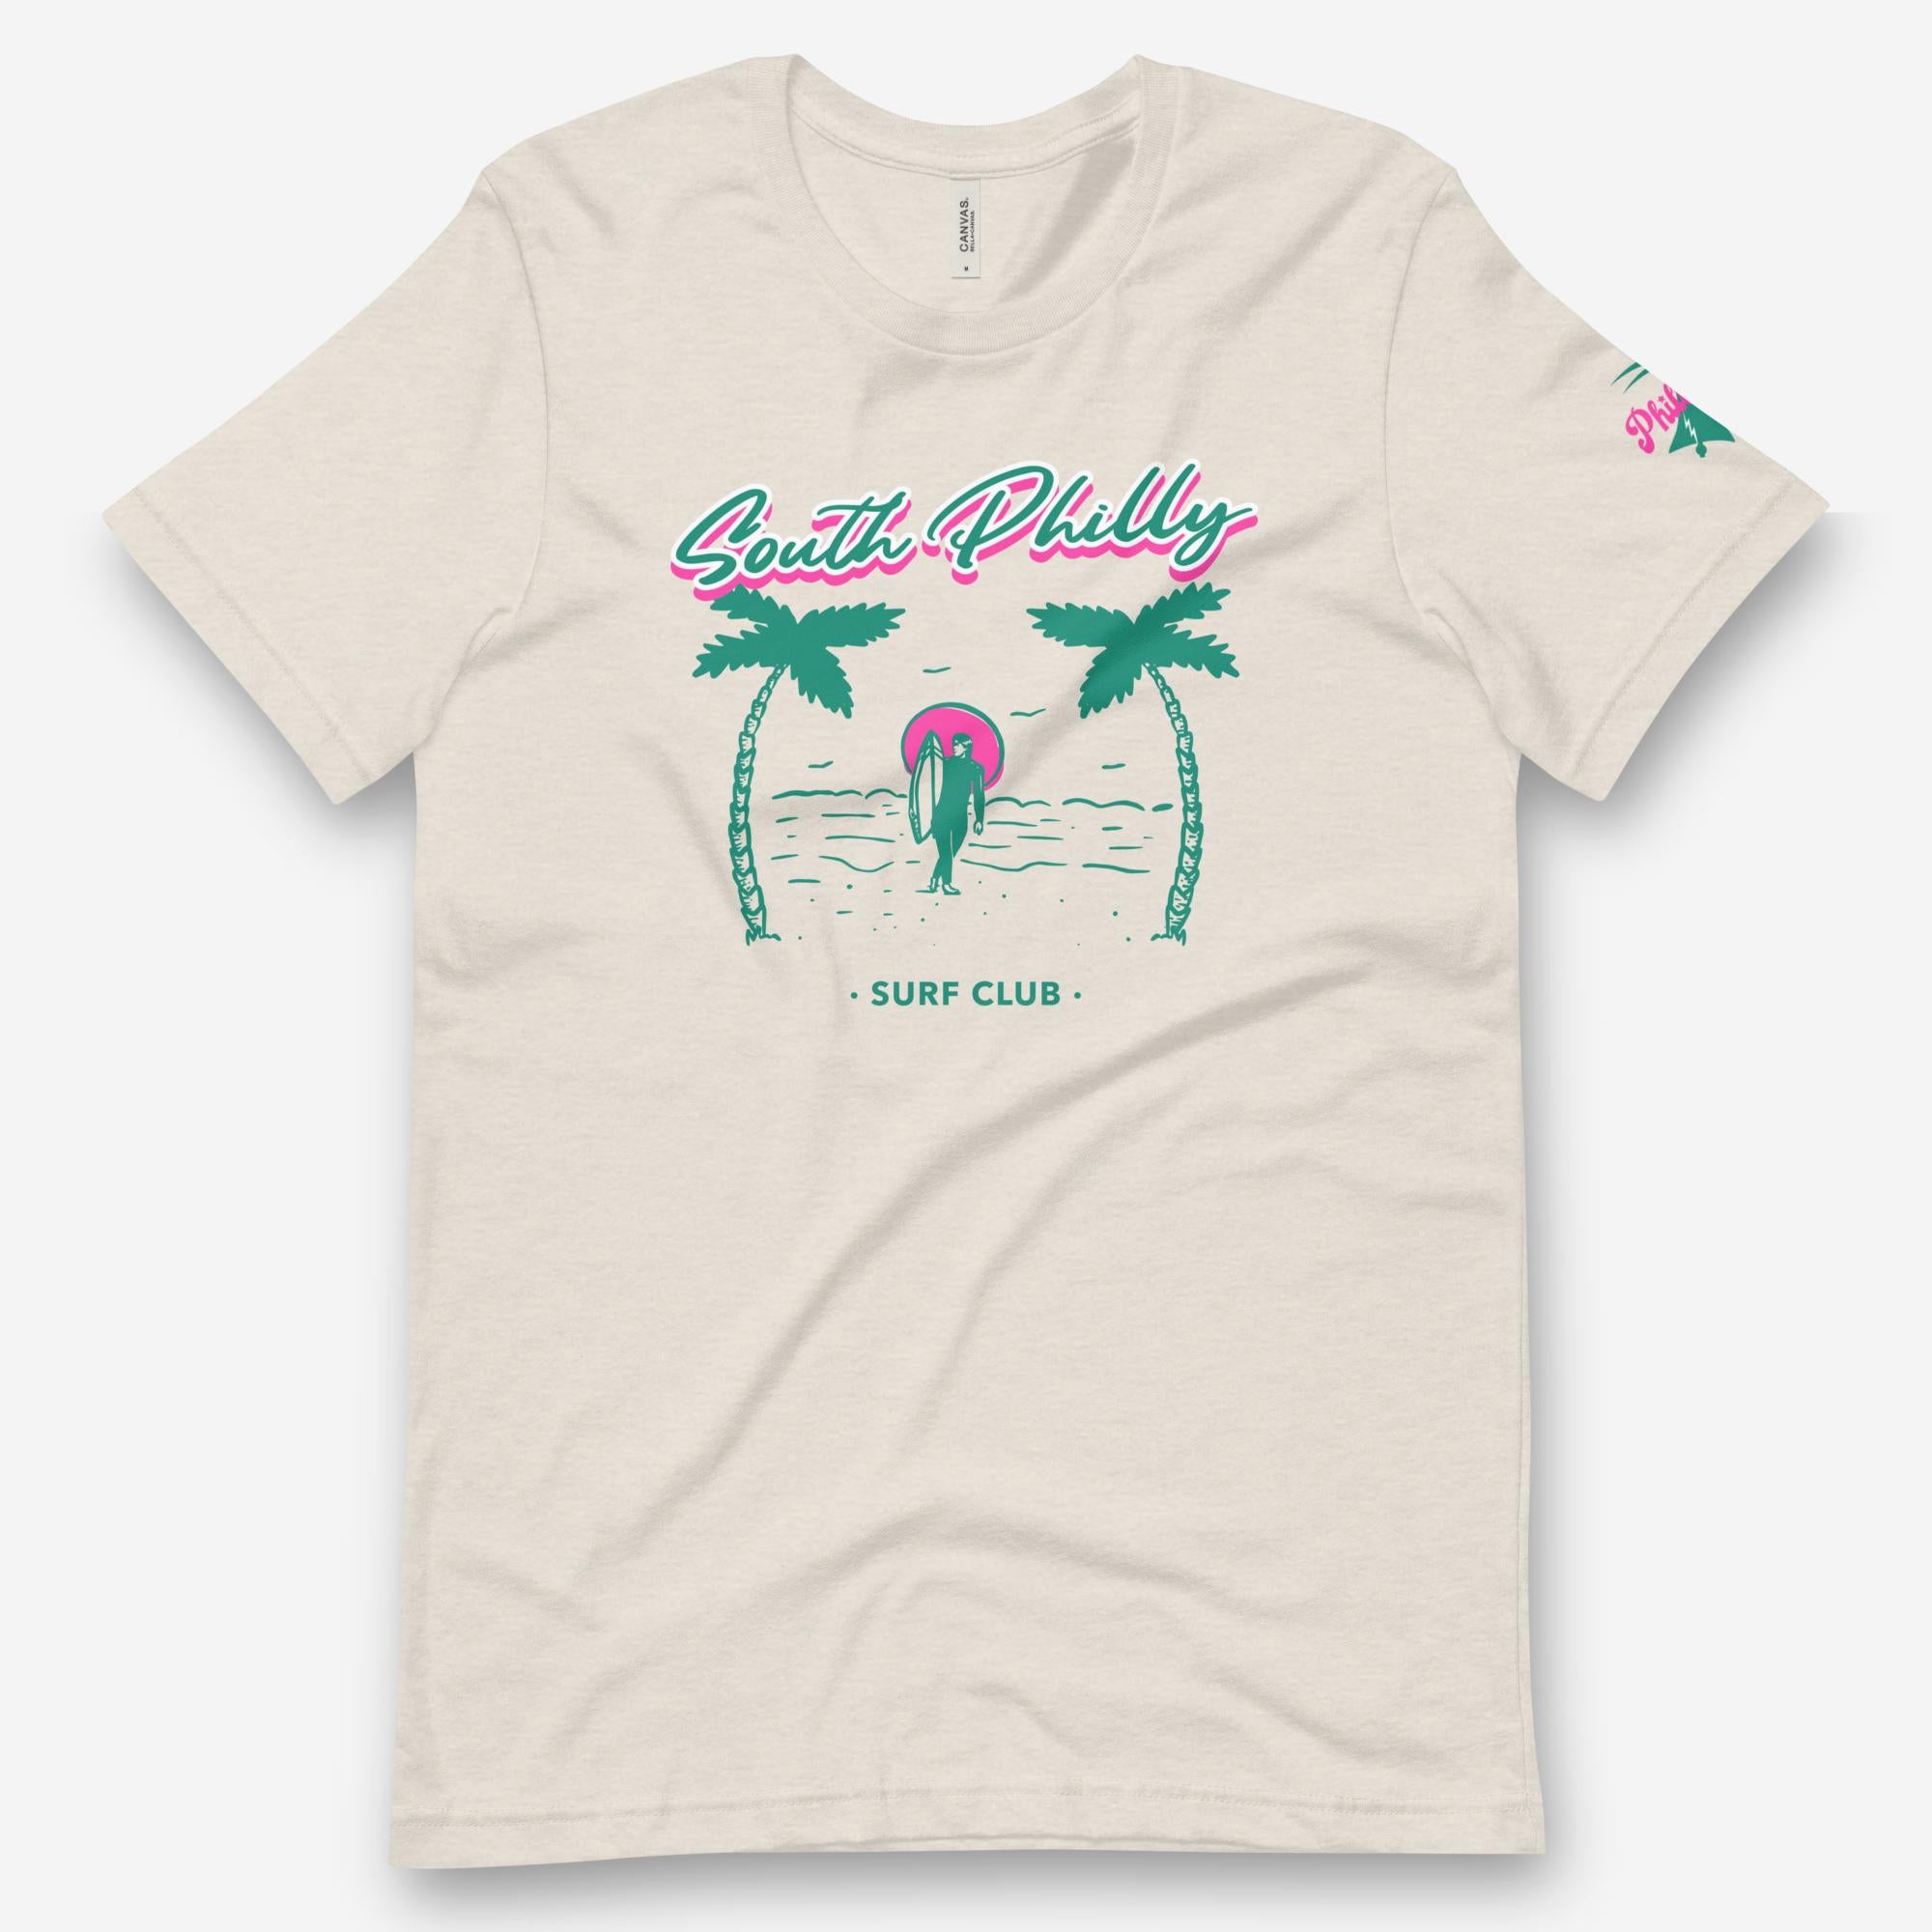 "South Philly Surf Club" Tee